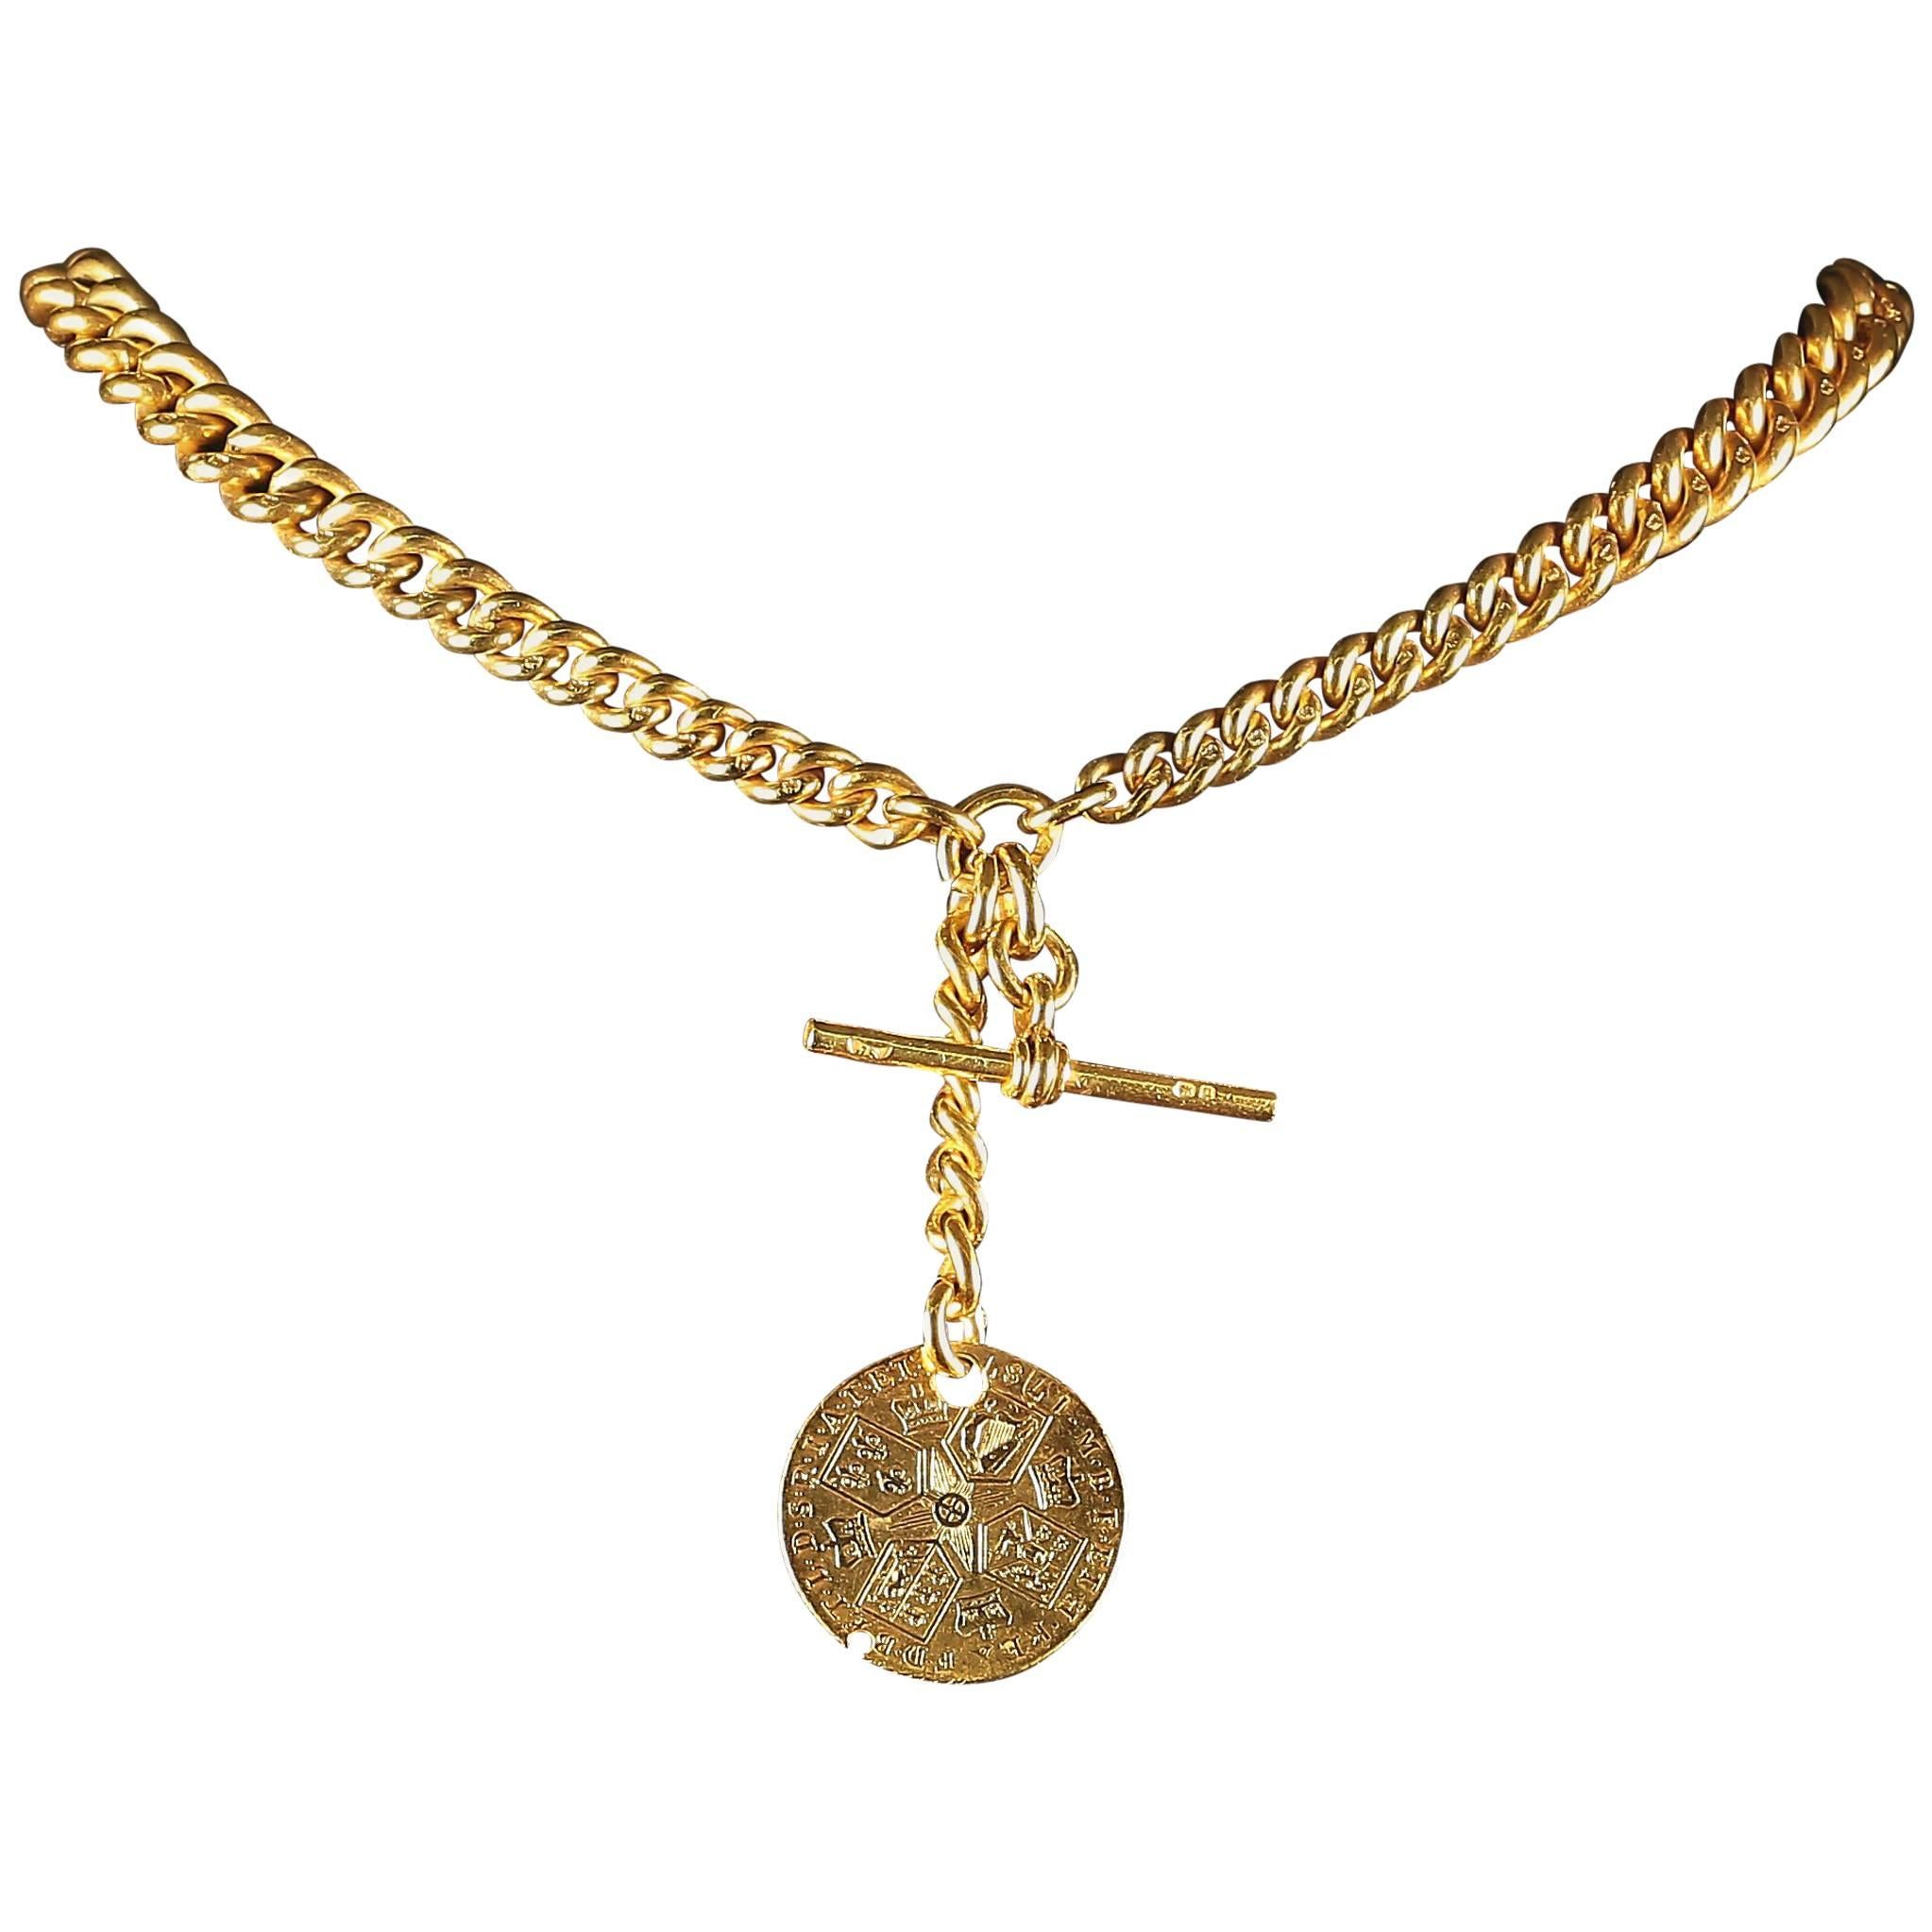 Antique Victorian Albert Chain Necklace with T Bar Coin Fob circa 1880